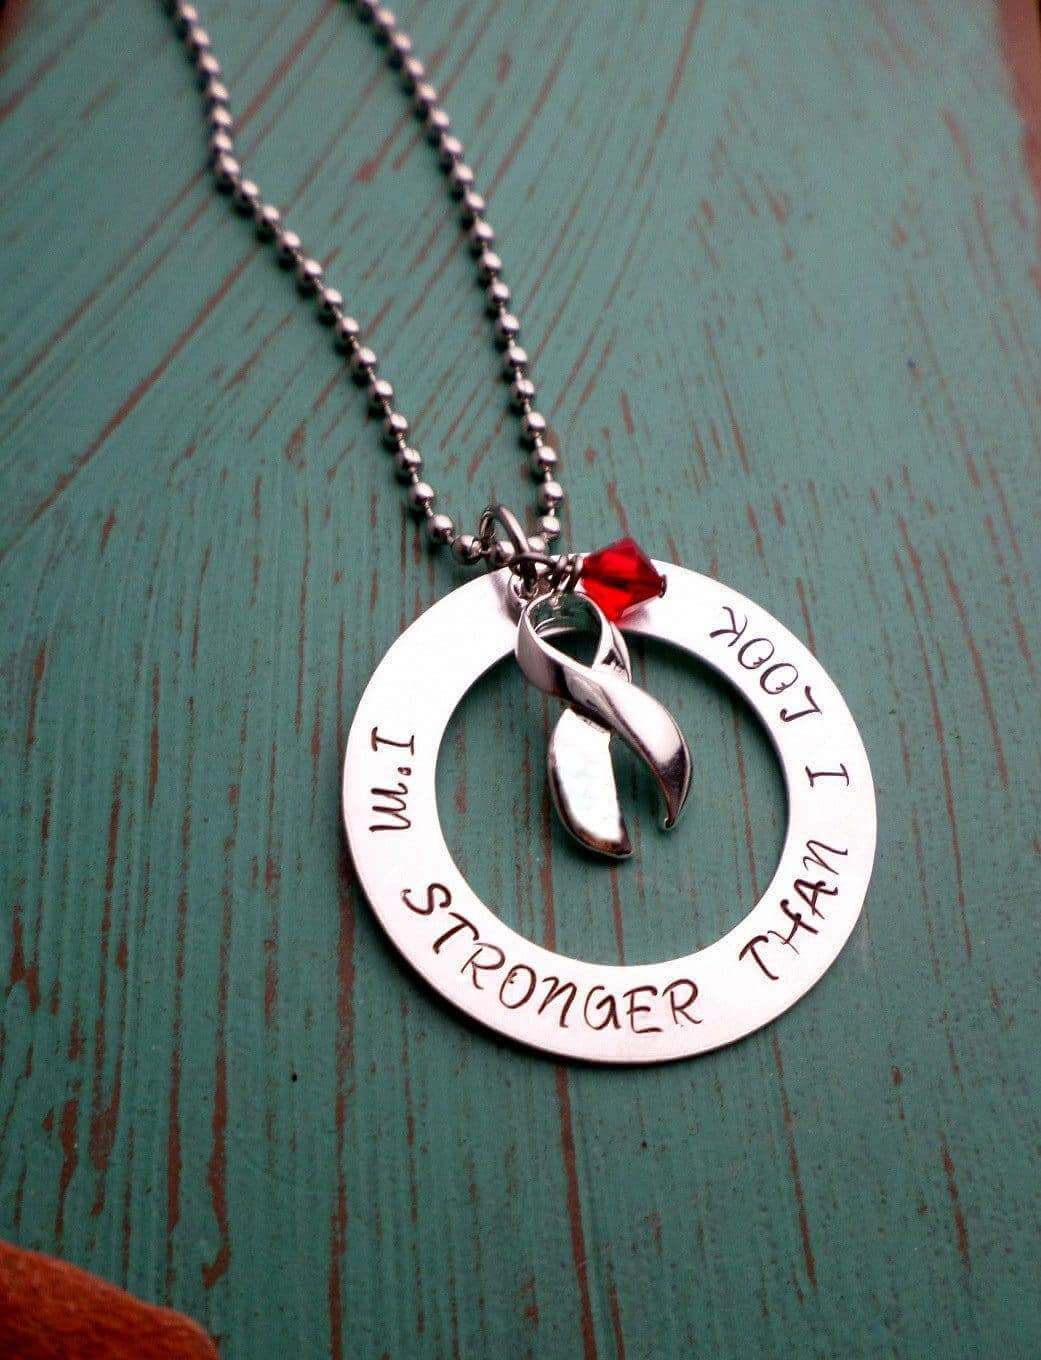 Red Ribbon Necklace, Heart Disease Awareness, Stroke Victim Awareness, HIV Aids Disease Awareness, Necklaces, HandmadeLoveStories, HandmadeLoveStories , [Handmade_Love_Stories], [Hand_Stamped_Jewelry], [Etsy_Stamped_Jewelry], [Etsy_Jewelry]